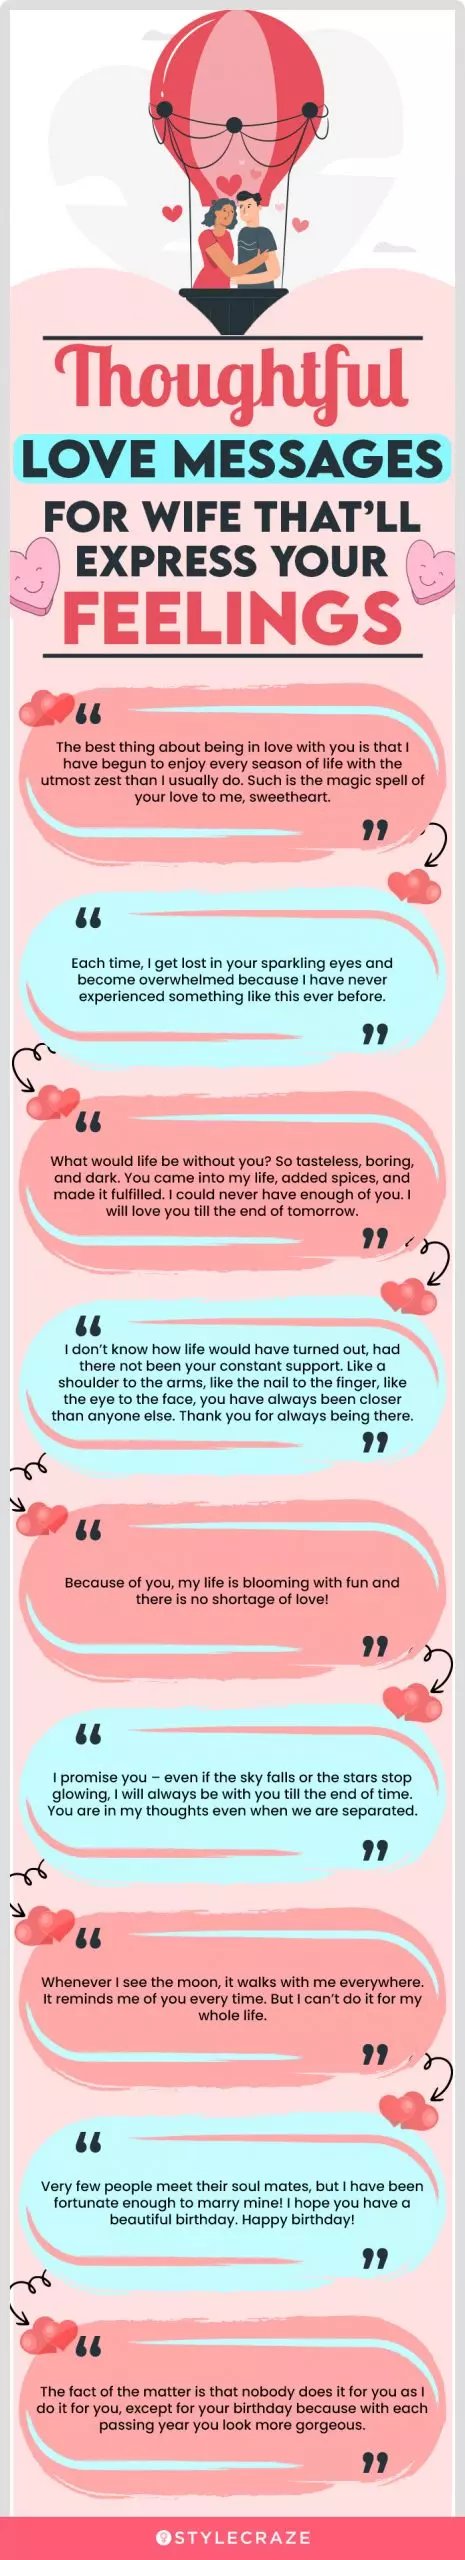 thoughtful love messages for wife that’ll express your feelings (infographic)